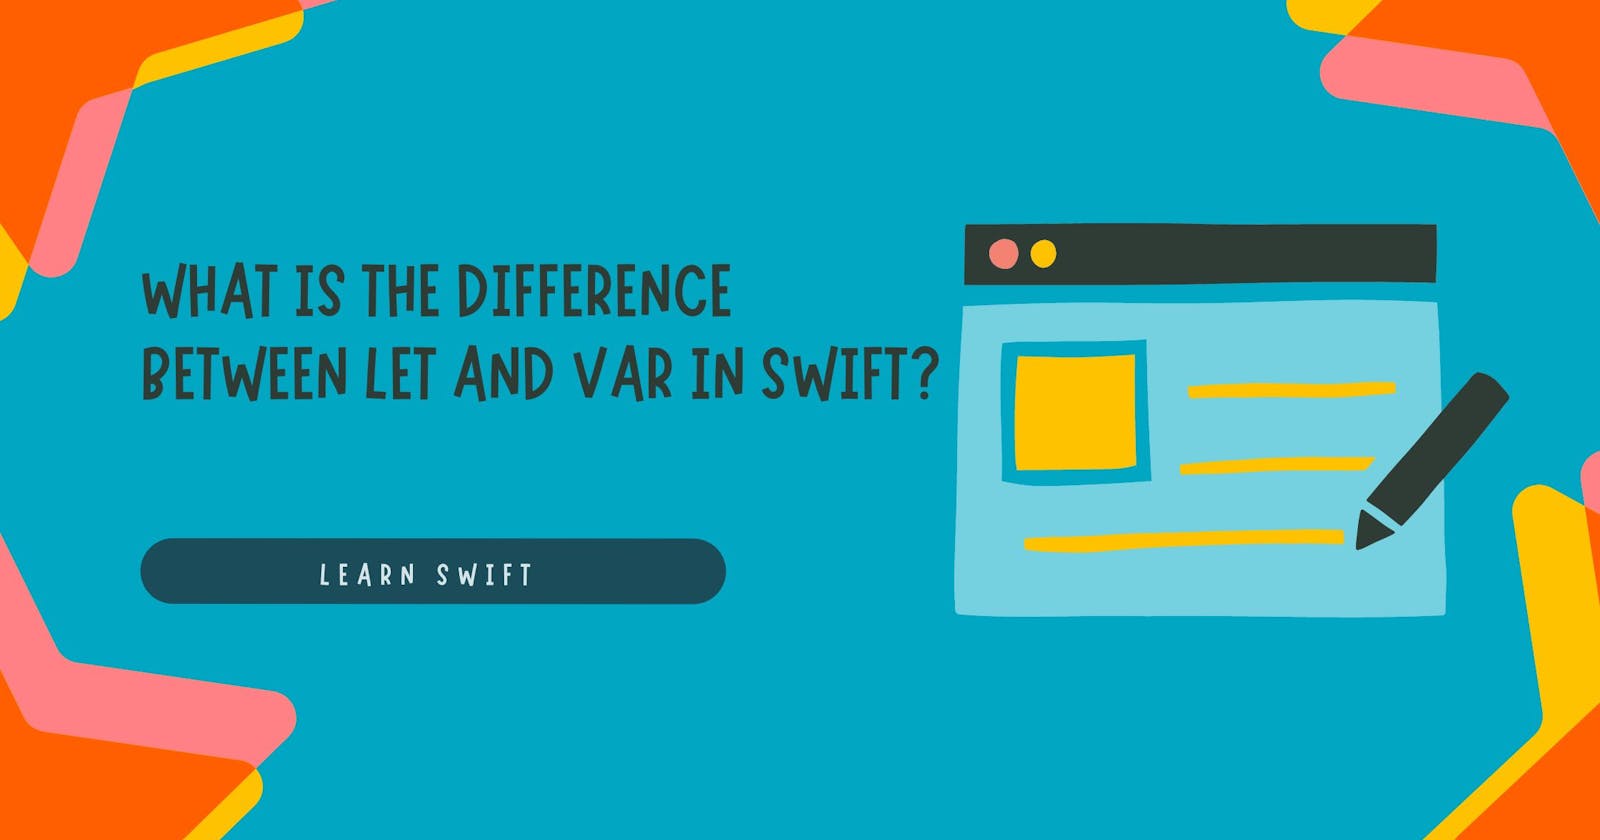 What is the difference between let and var in Swift?